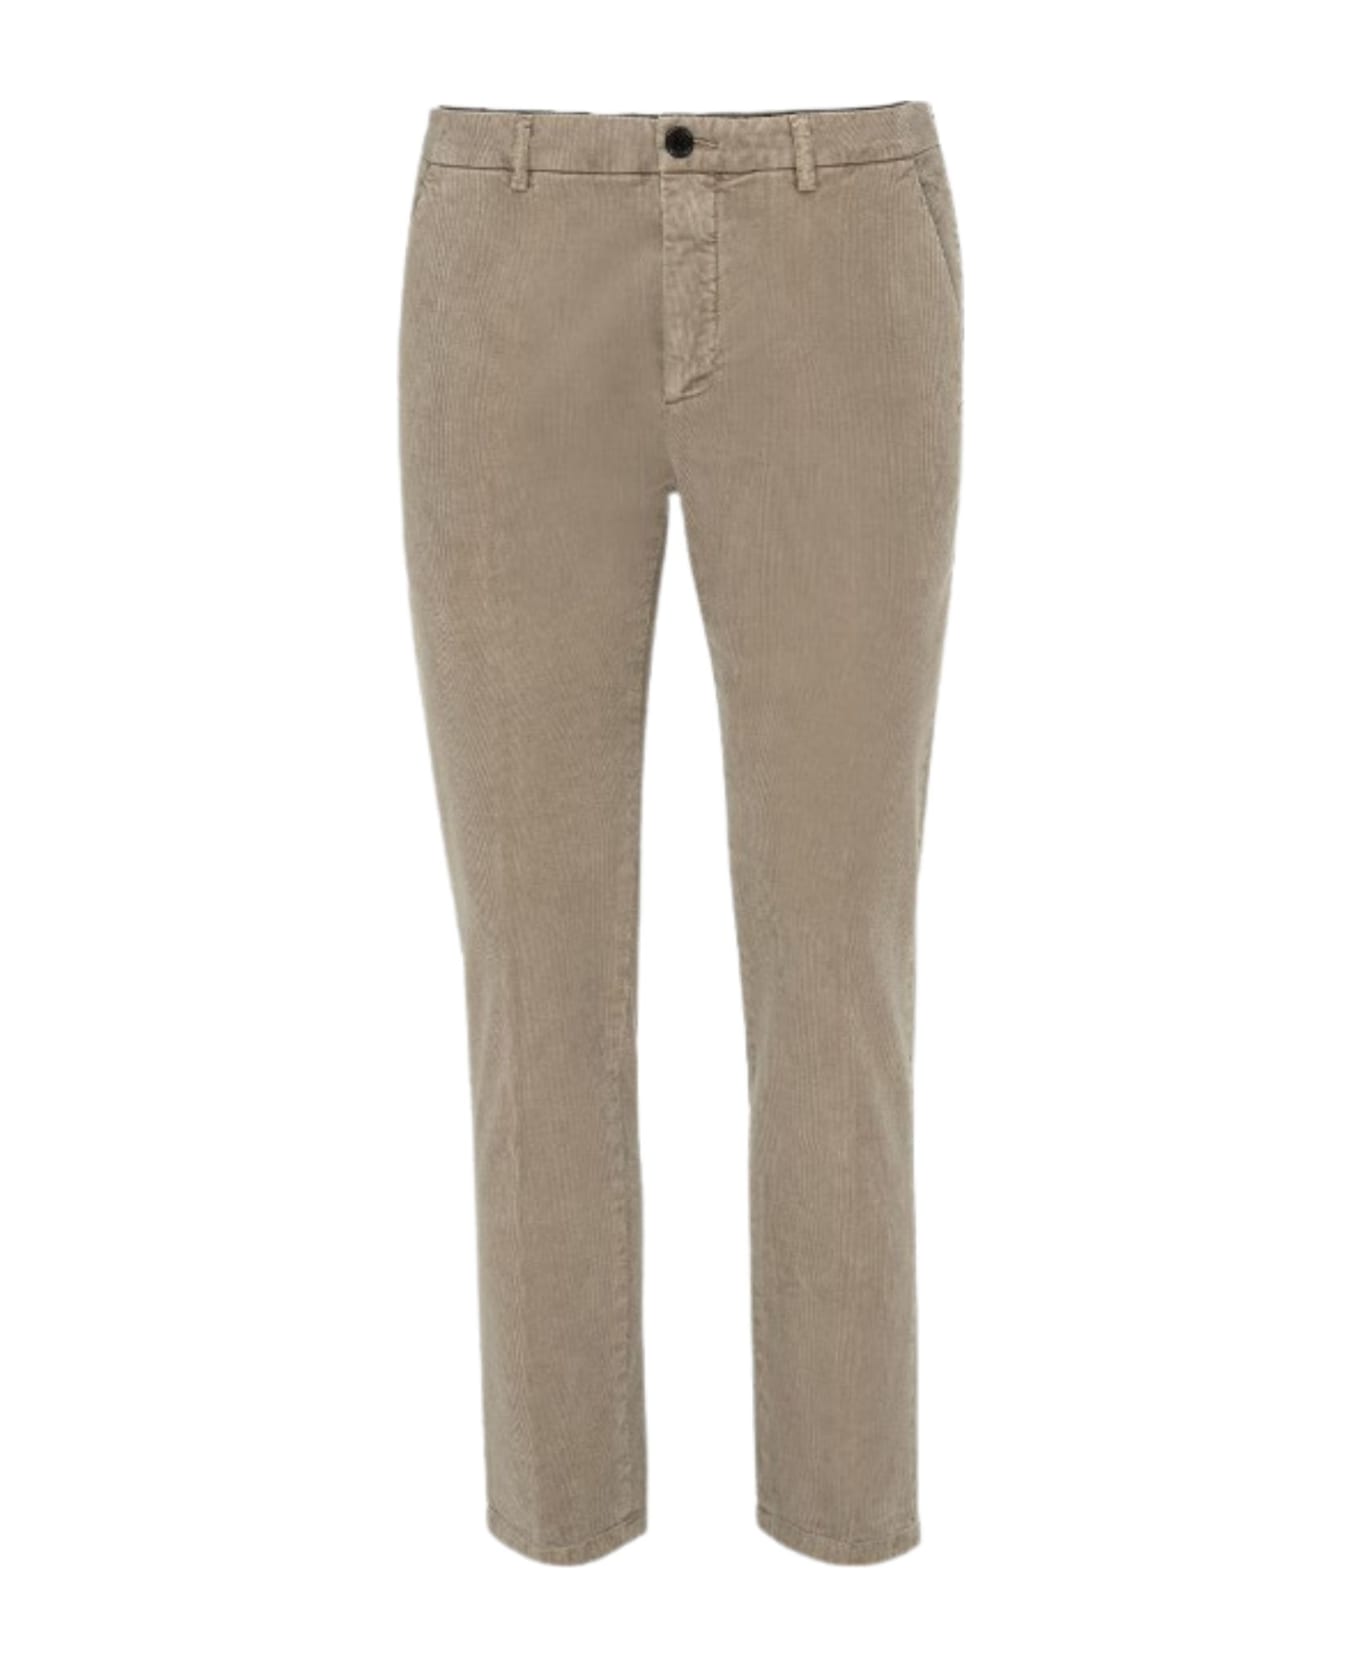 Department Five Prince Pences Chinos - Taupe